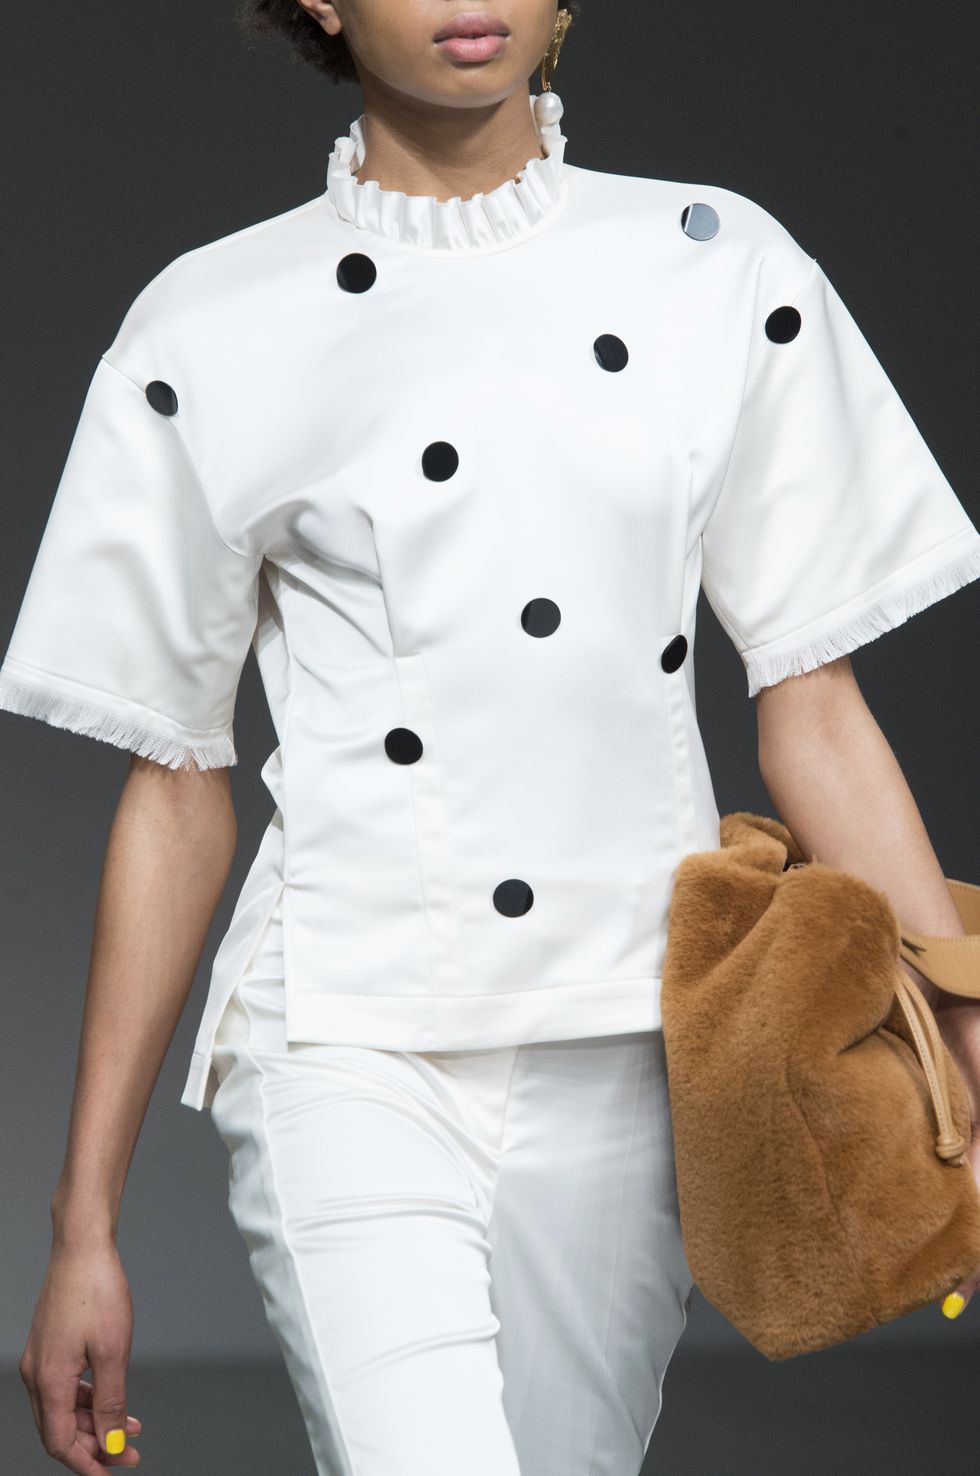 Chef's uniform, Clothing, White, Sleeve, Uniform, Outerwear, Chef, Cook, Trench coat, 